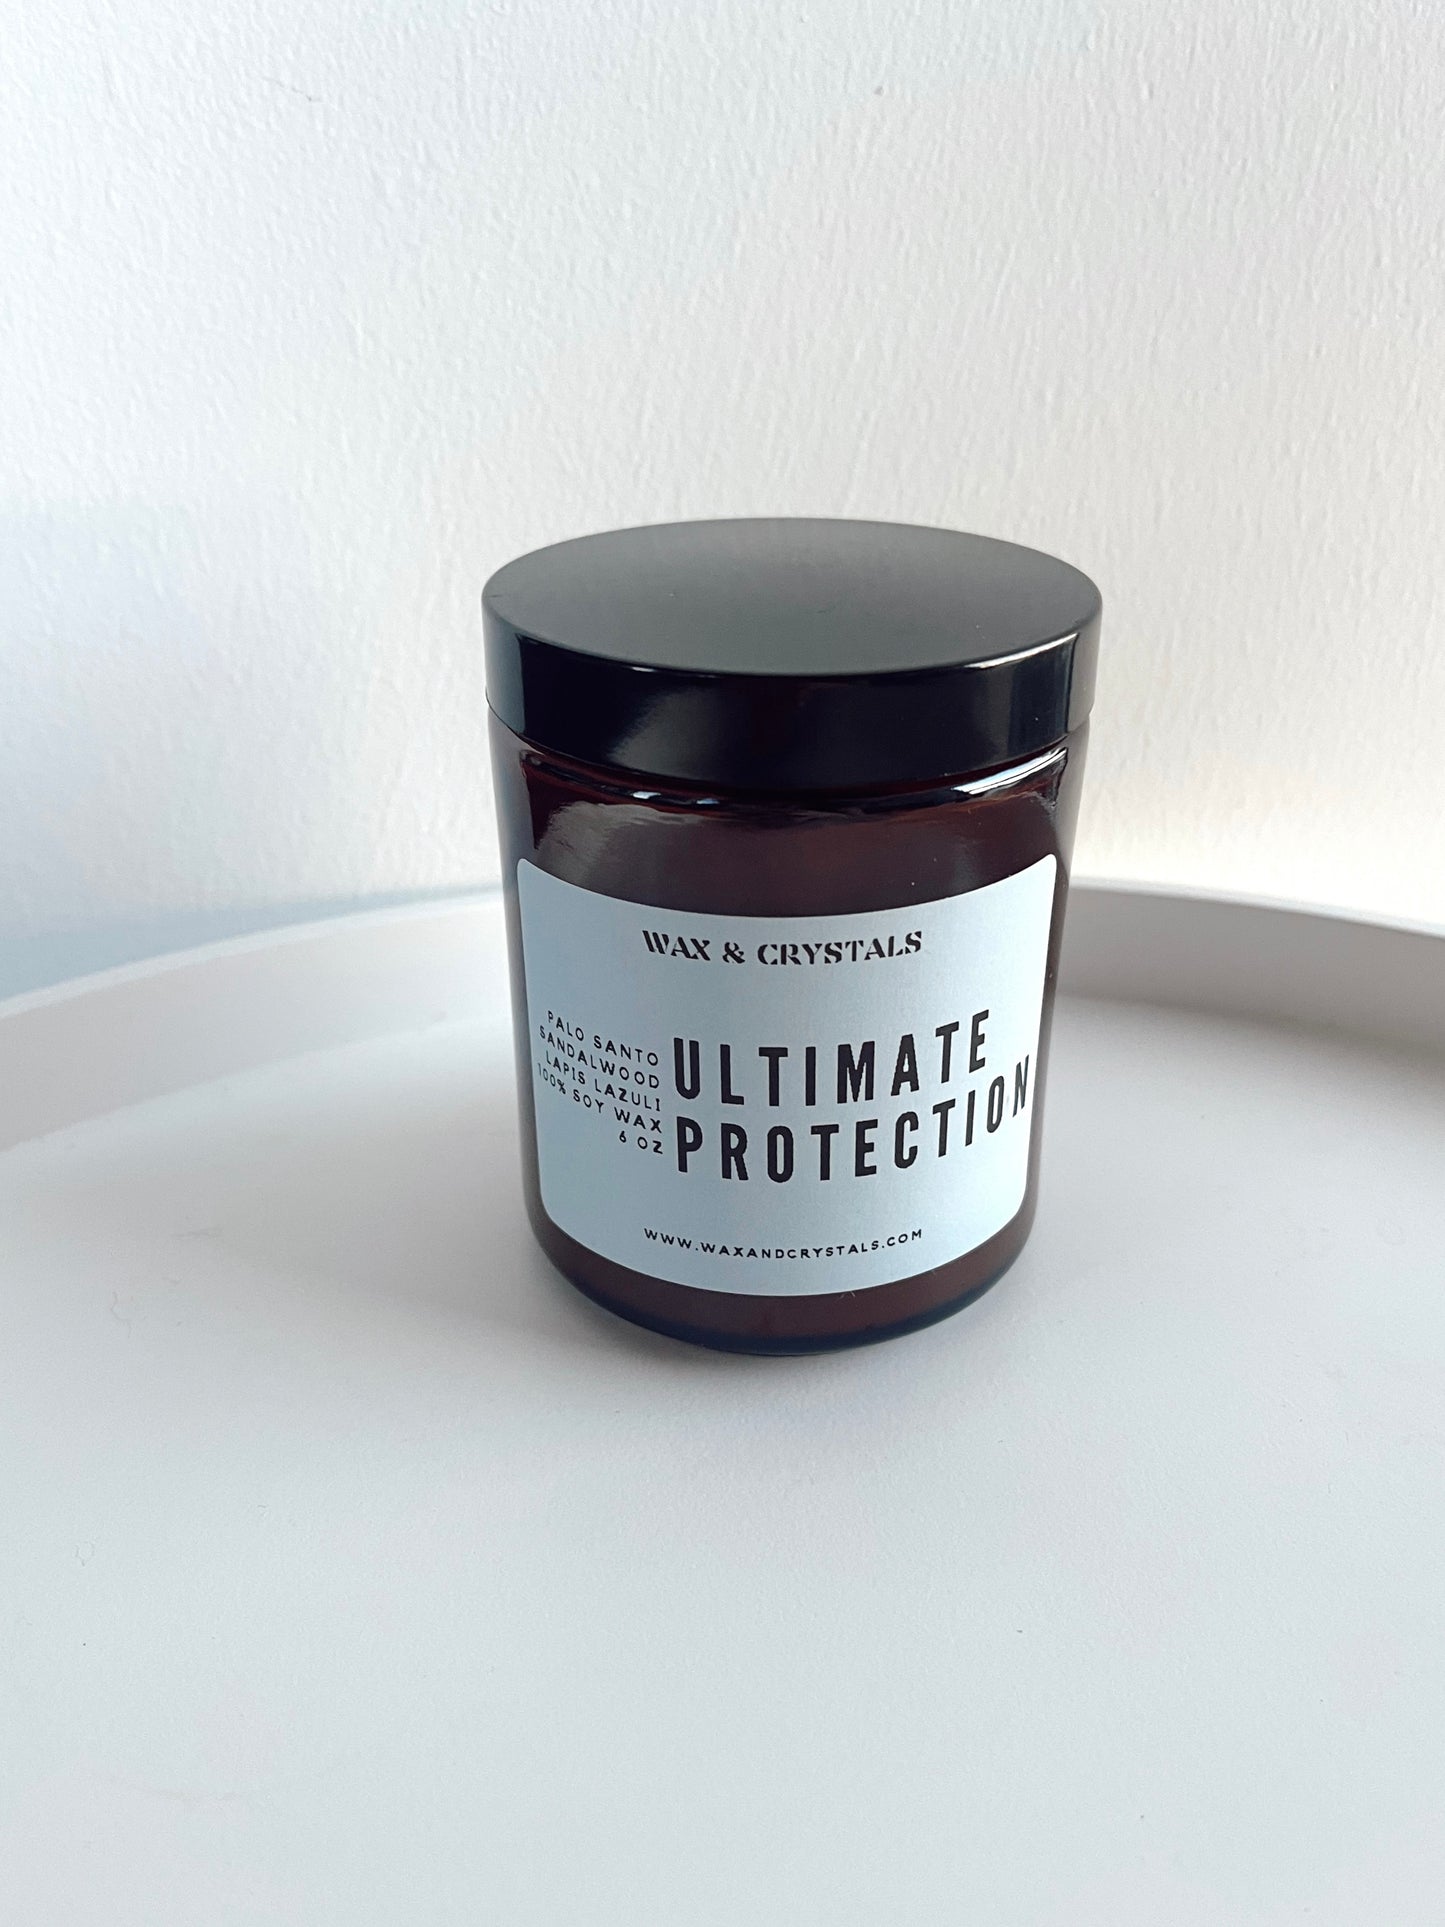 Palo Santo and Sandalwood Scented Ultimate Protection Candle